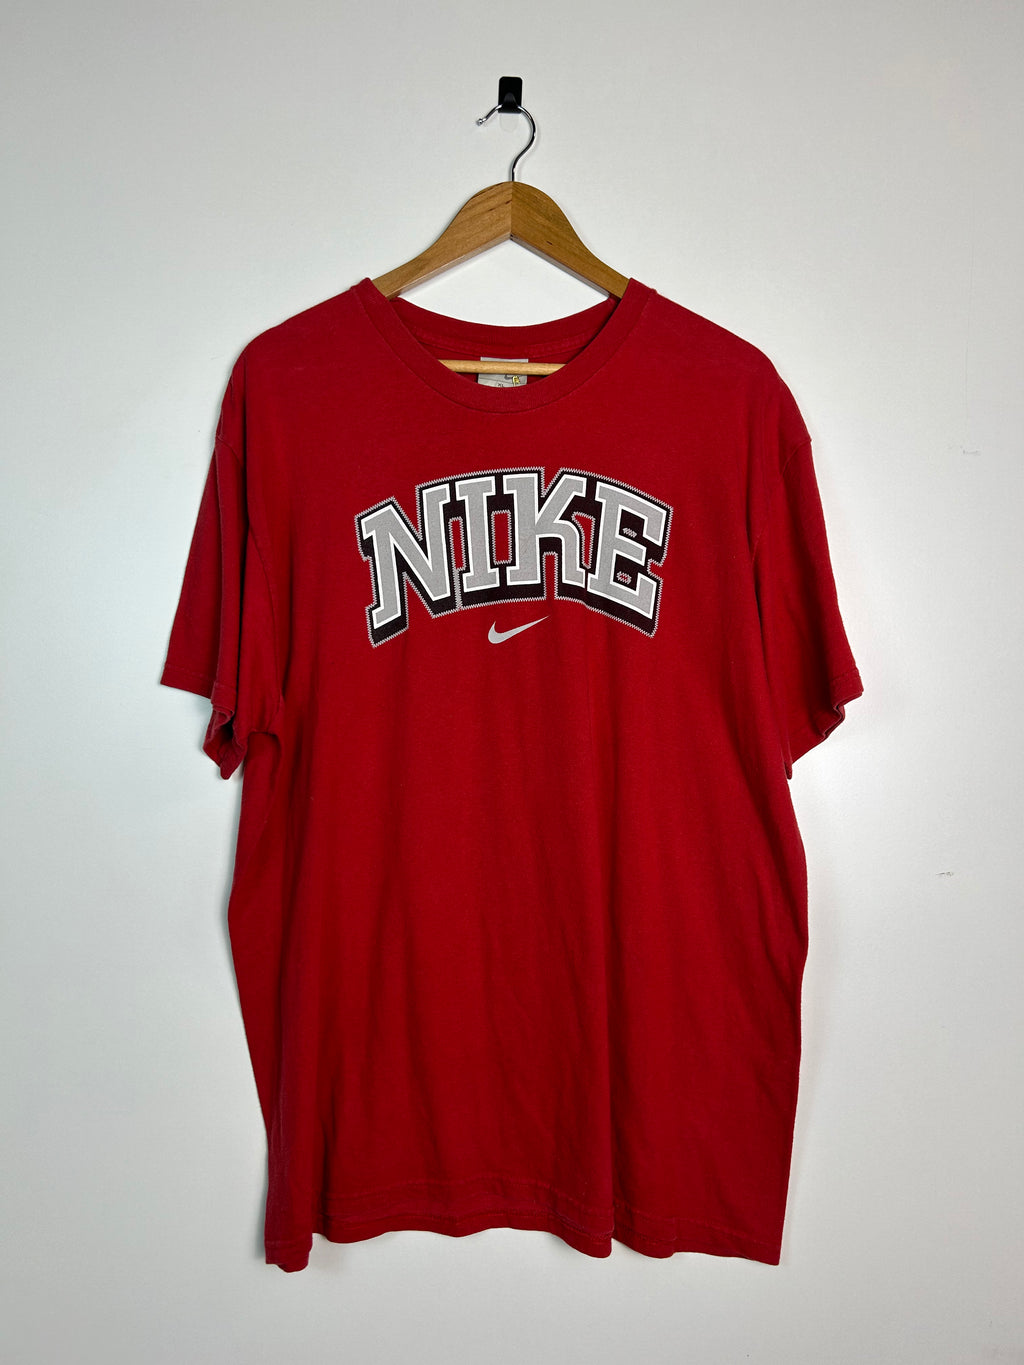 Nike graphic red tee